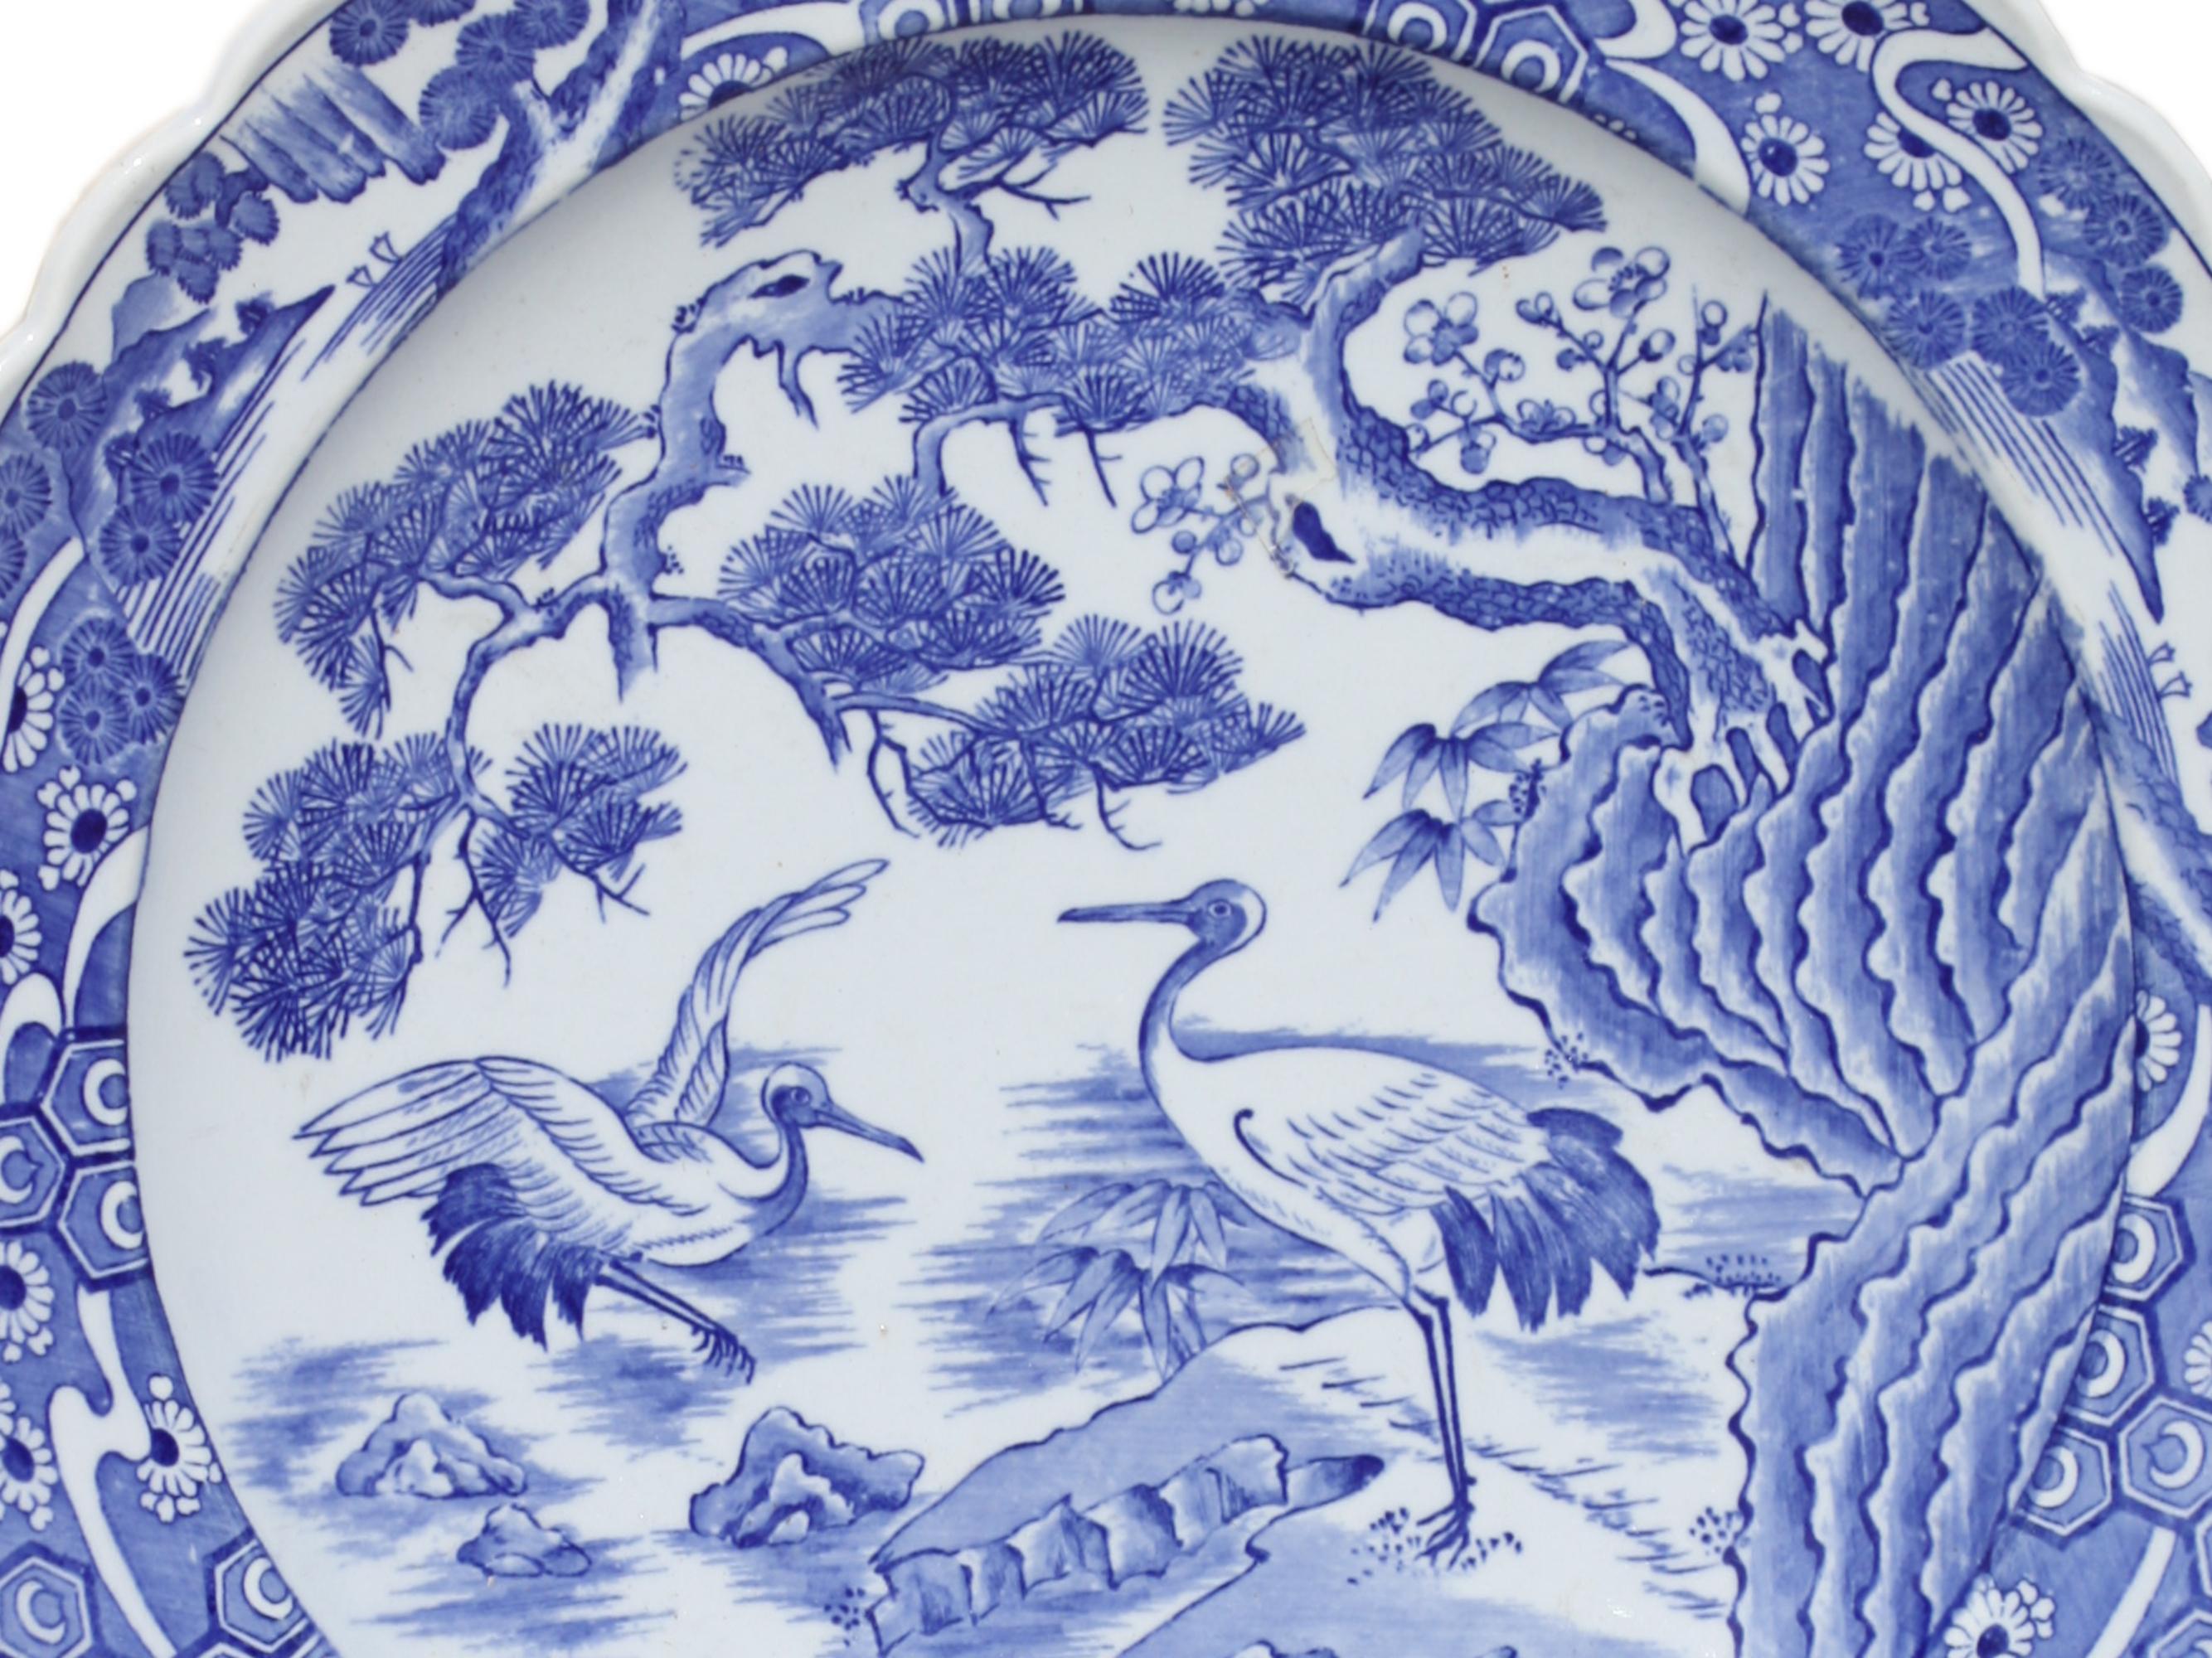 20th Century Japanese Blue and White Decorated Porcelain Plate, Meiji Period (1868-1912) For Sale